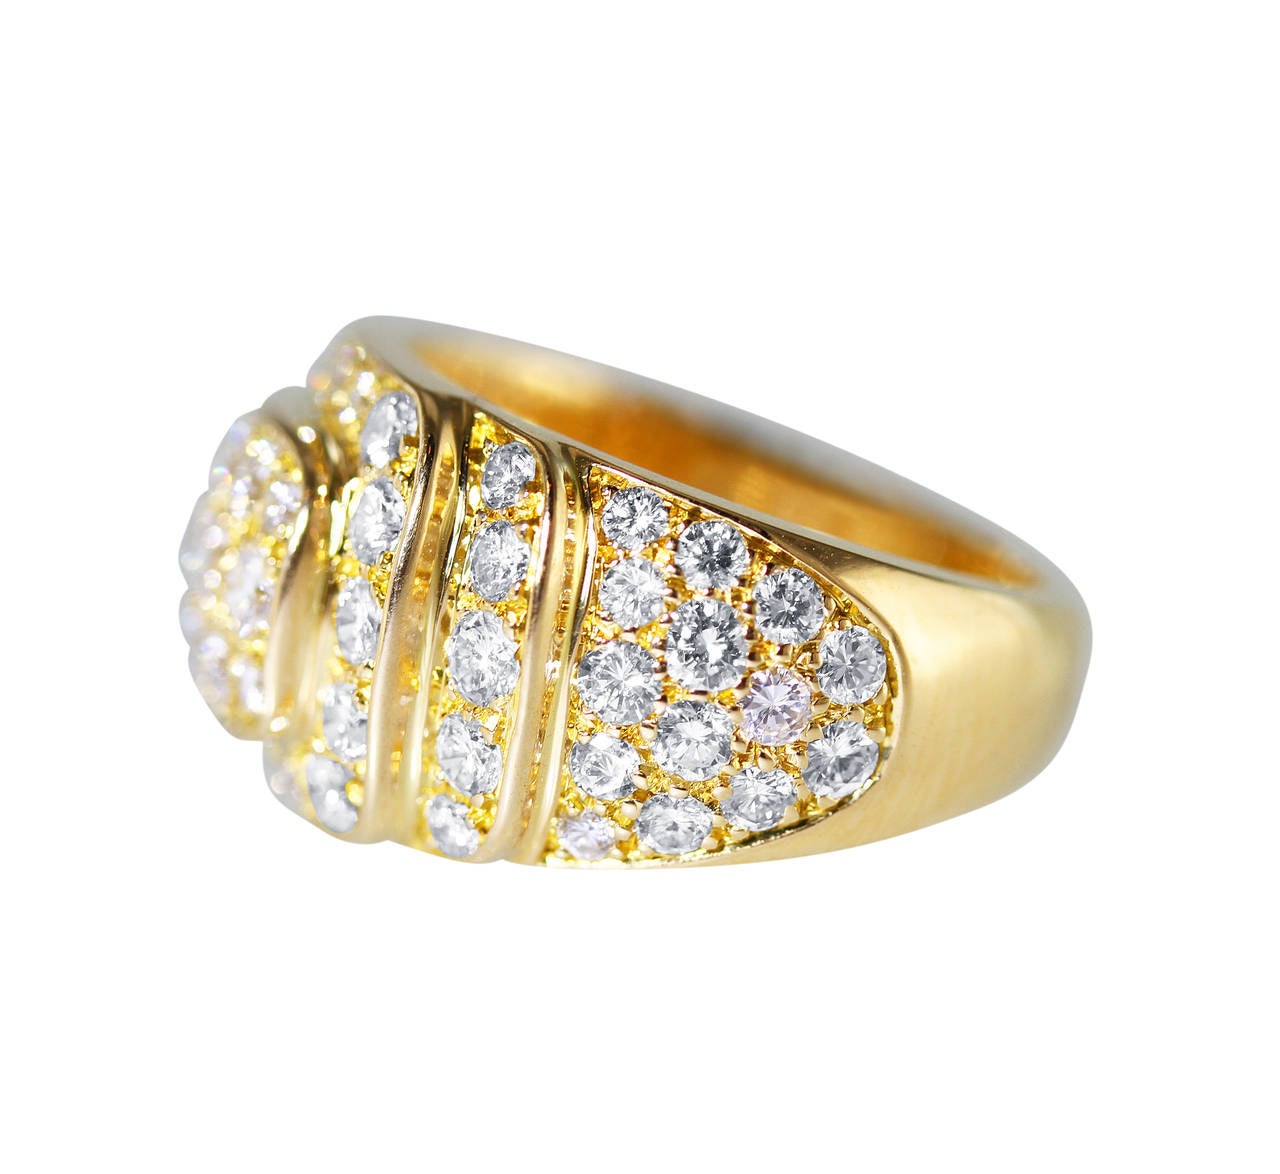 An 18 karat yellow gold and diamond ring by Van Cleef & Arpels, France, of tapered design set with 67 round diamonds weighing approximately 2.50 carats, gross weight 8.1 grams, size 5 3/4, measuring 3/4 by 1/2 by 7/8 inches, signed VCA, numbered